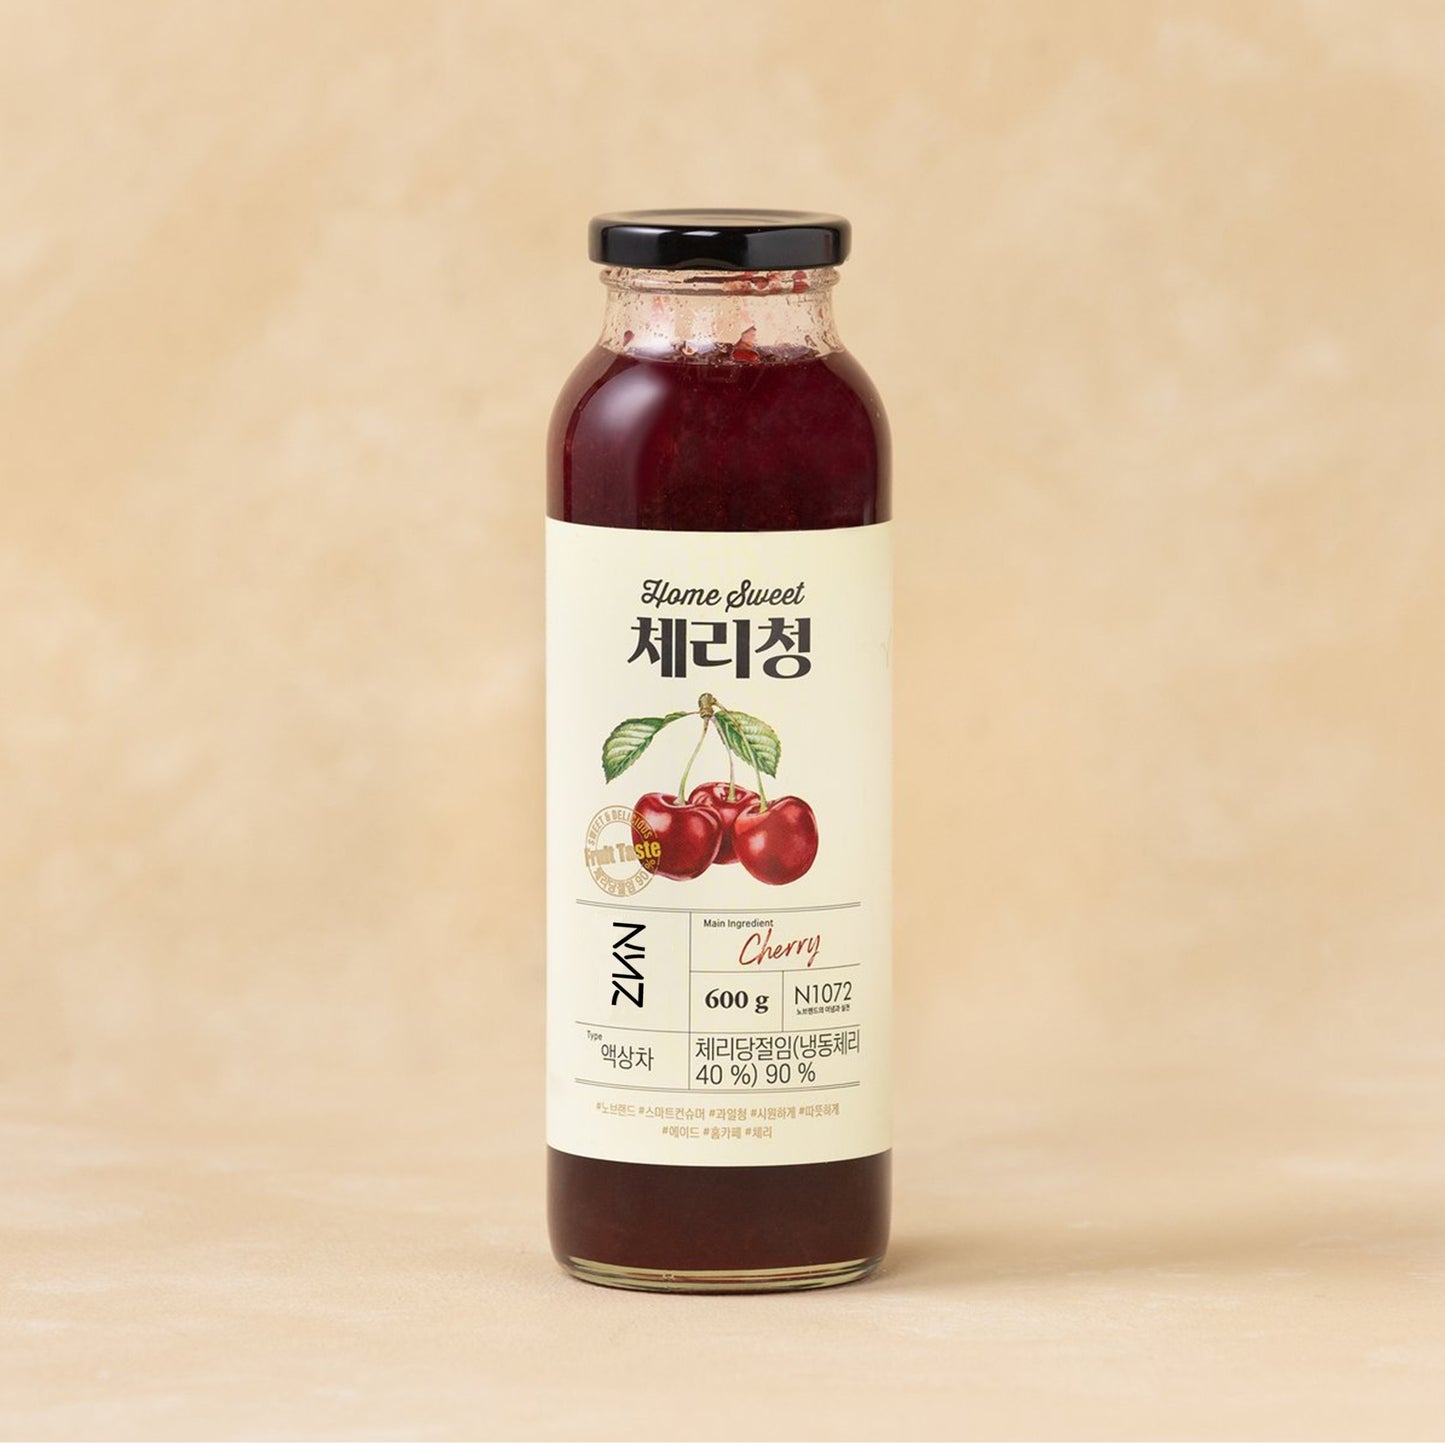 Cherry Flavor Syrup, 21.16 oz(600g), Makes a Refreshing Cool Drink Including Fruit Drinks, Smoothies, Juice, Soda, Iced tea & More